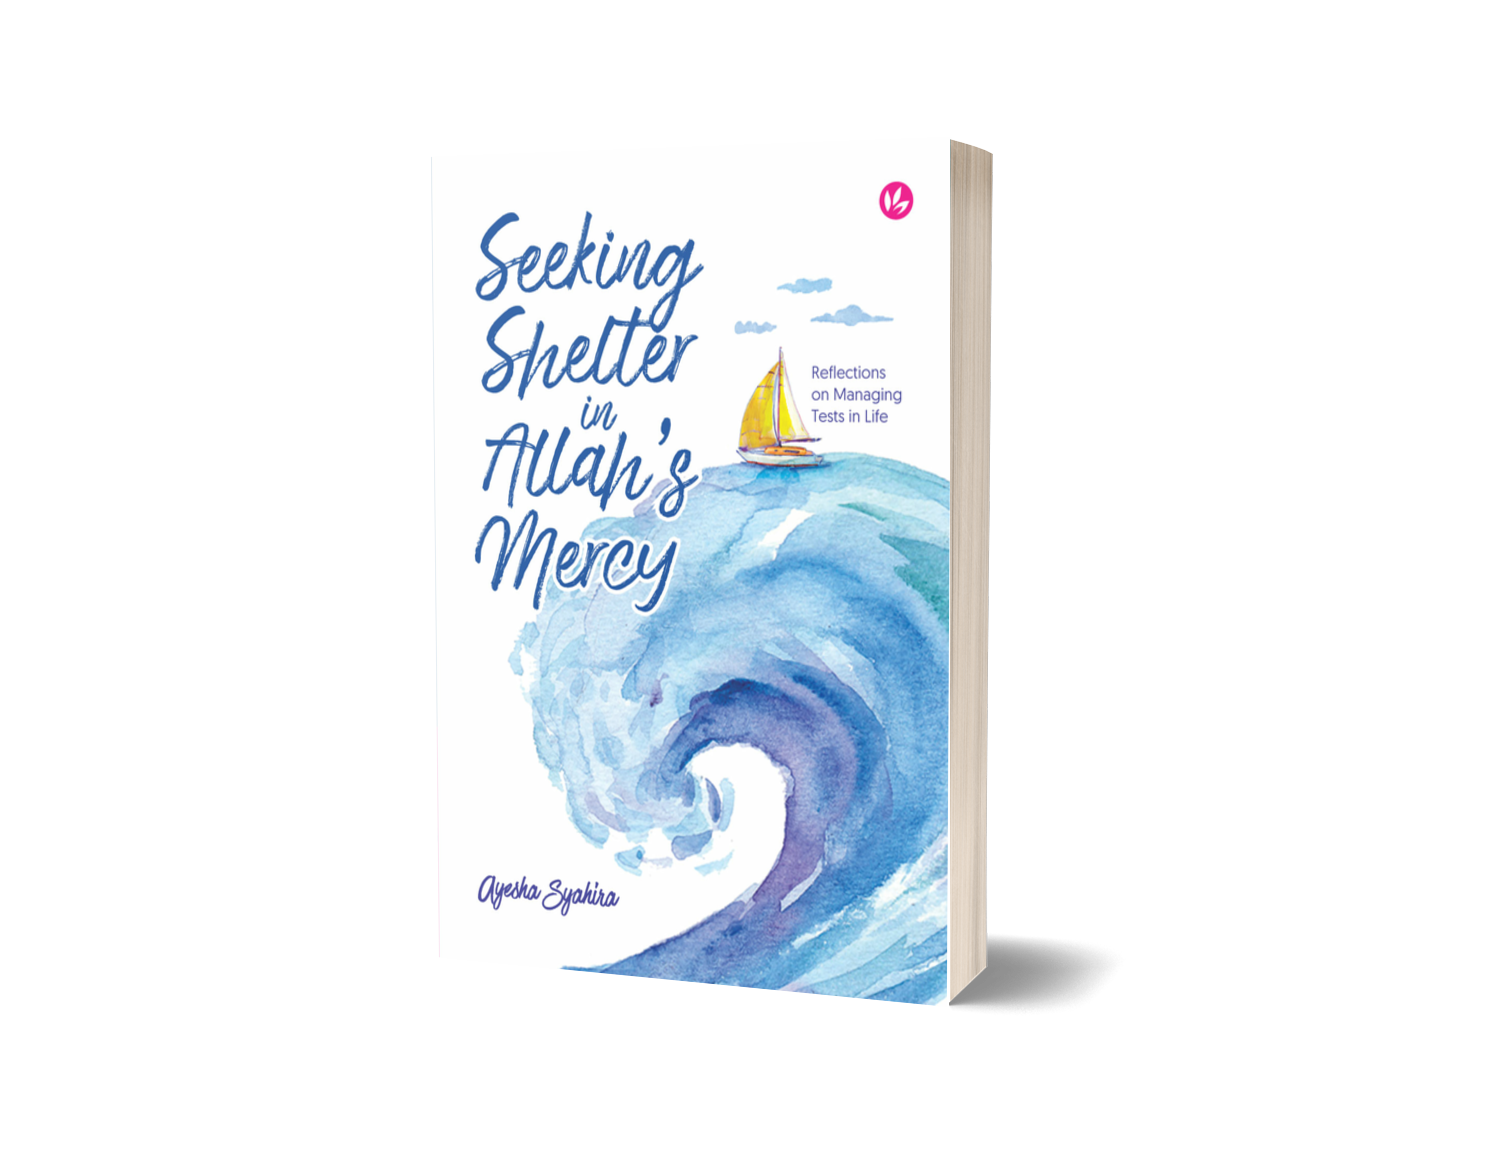 Iman Publication Book Seeking Shelter in Allah’s Mercy: Reflections on Managing Tests in Life by Ayesha Syahira 201232